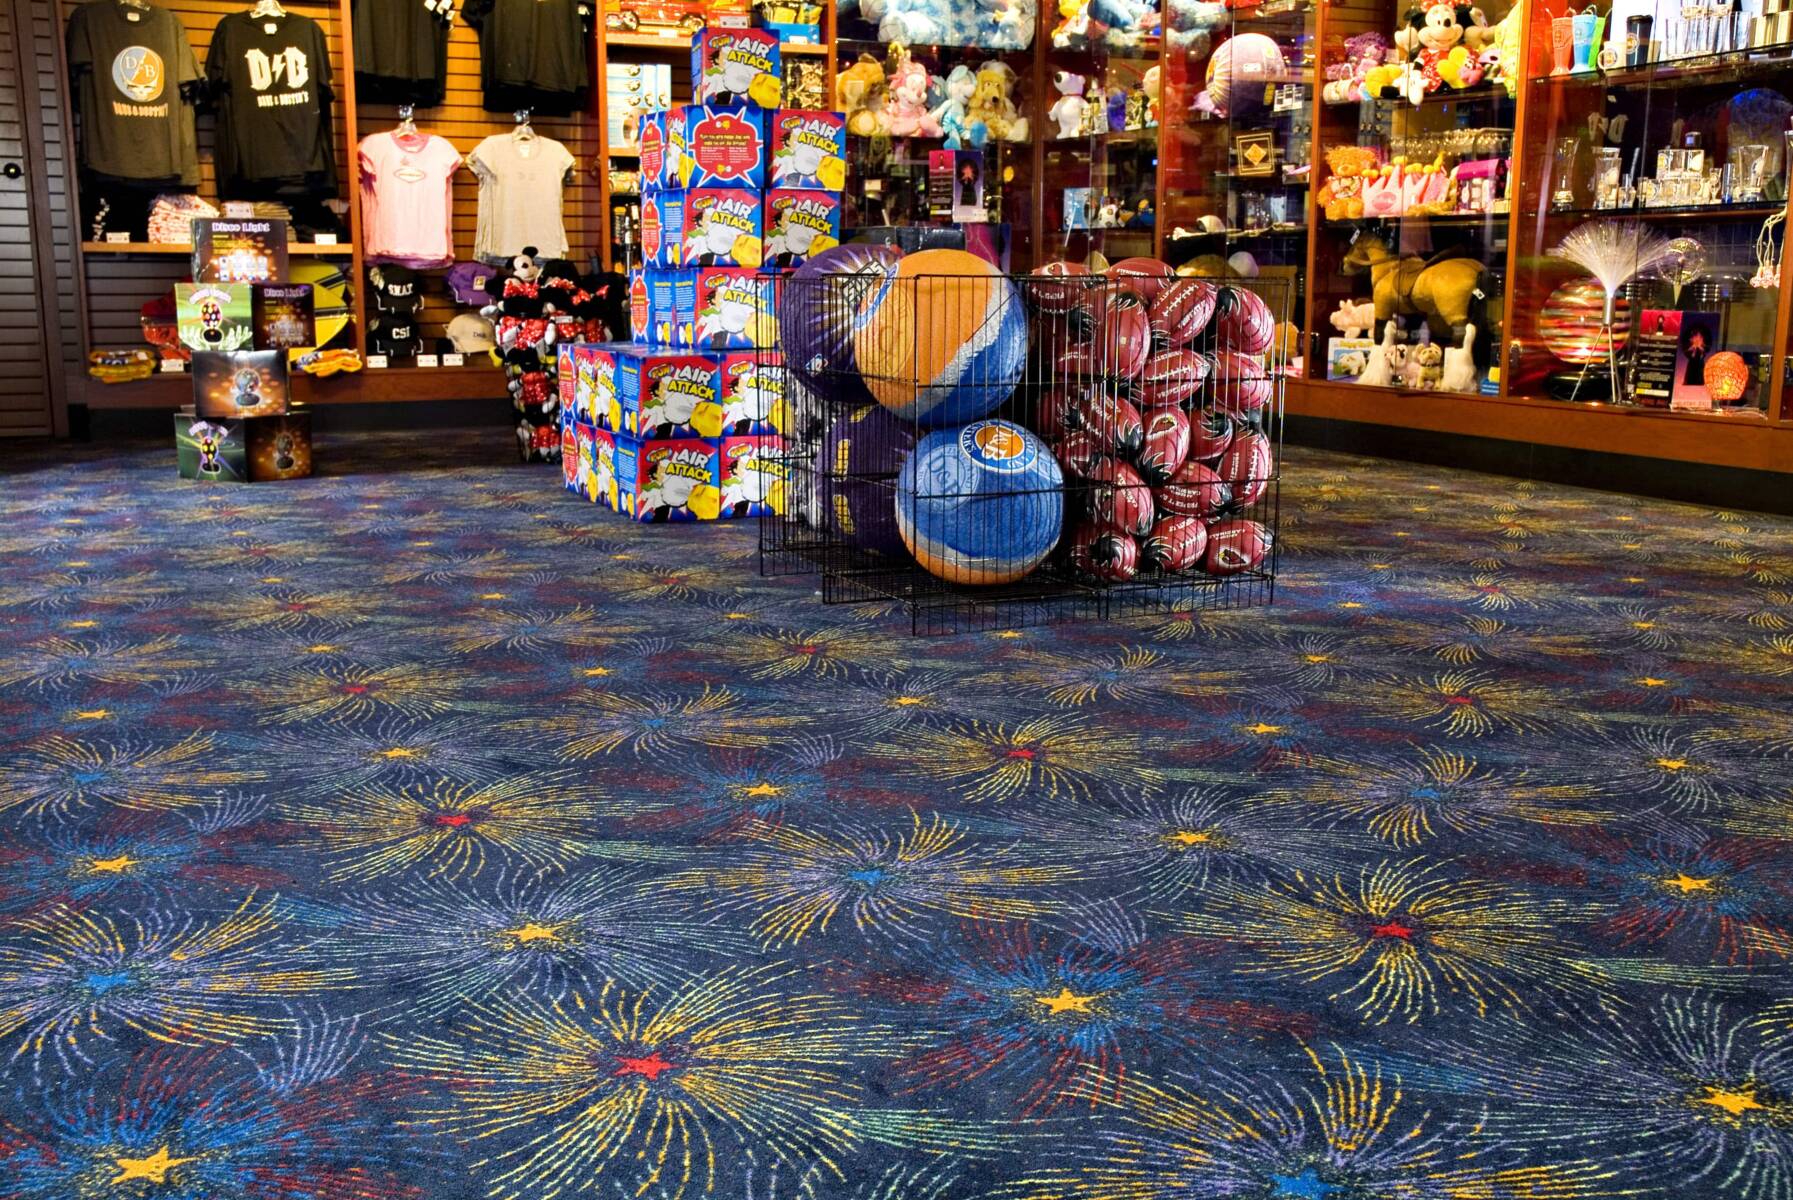 Dave and Busters gift shop filled with many toys and a colorful themed carpet demonstrating commercial flooring expertise